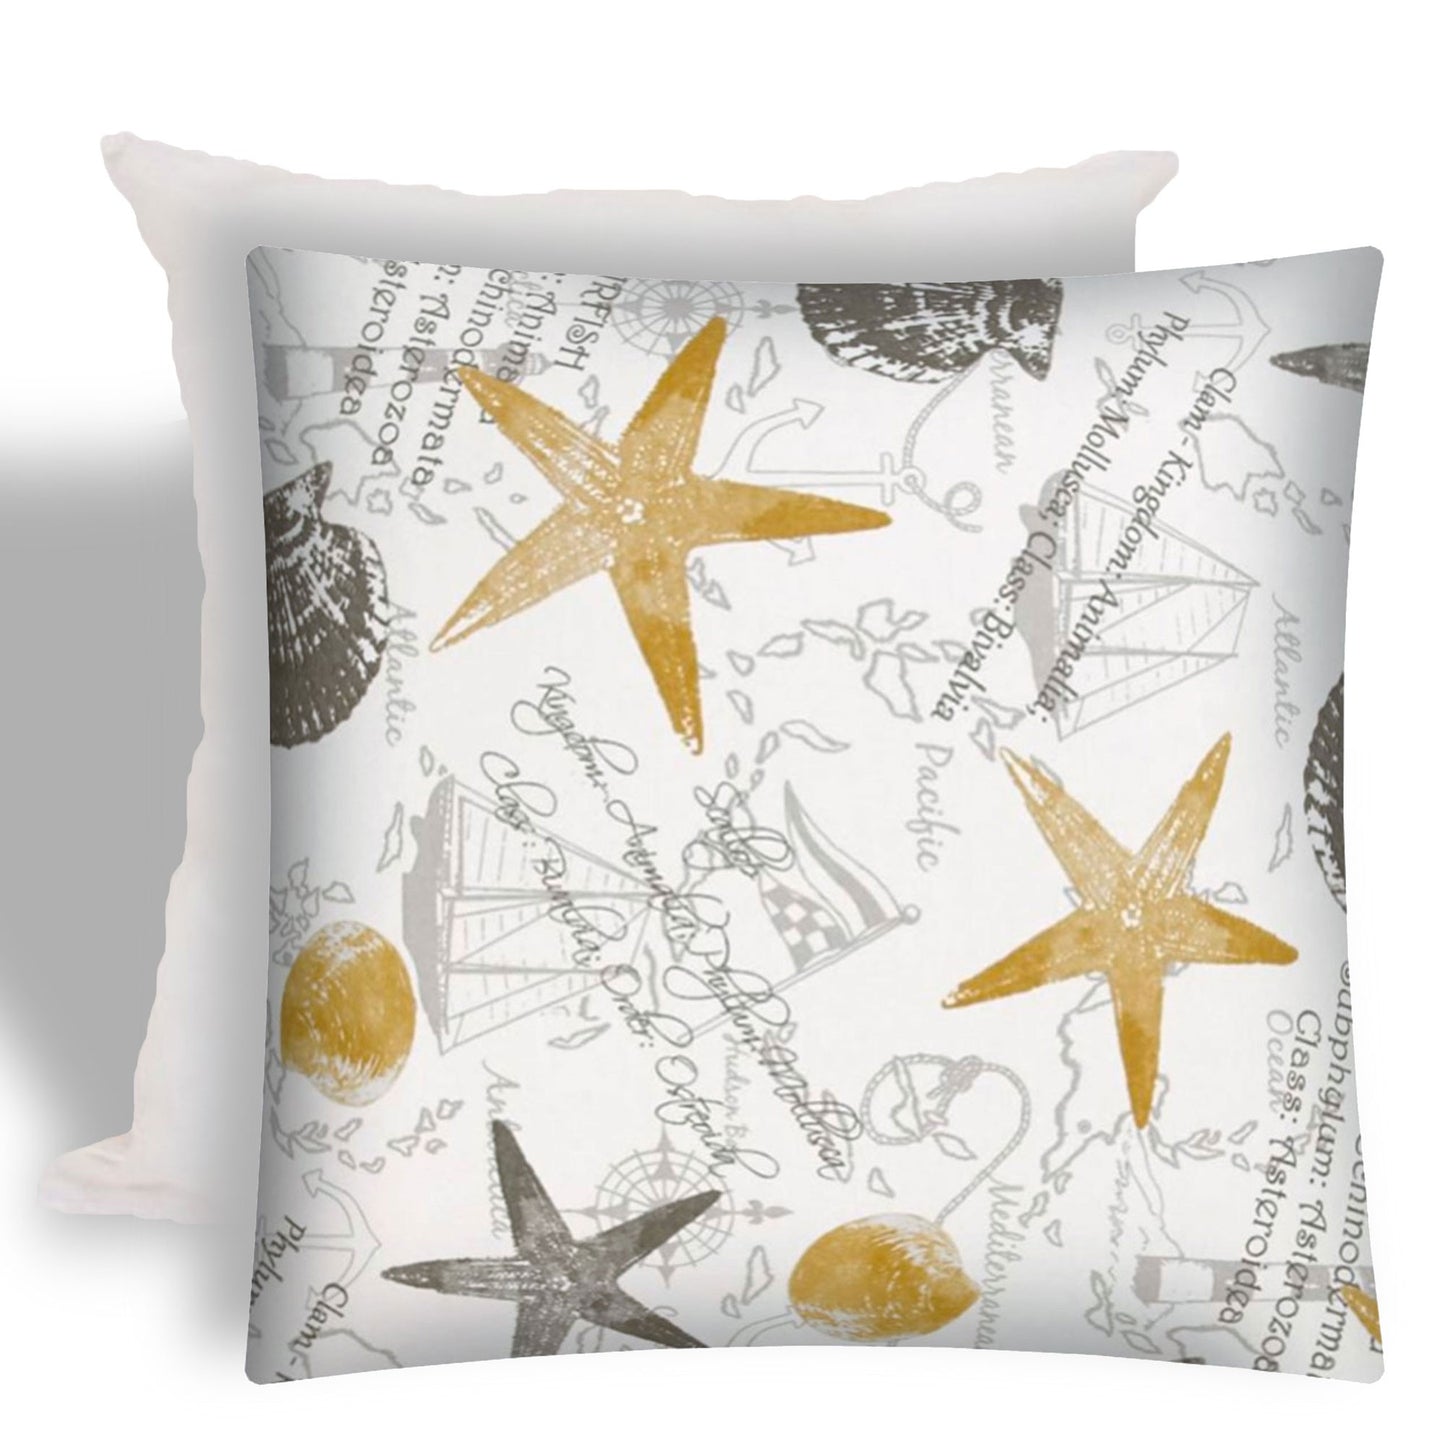 17" X 17" Gold And Cream Boat Zippered Coastal Throw Indoor Outdoor Pillow